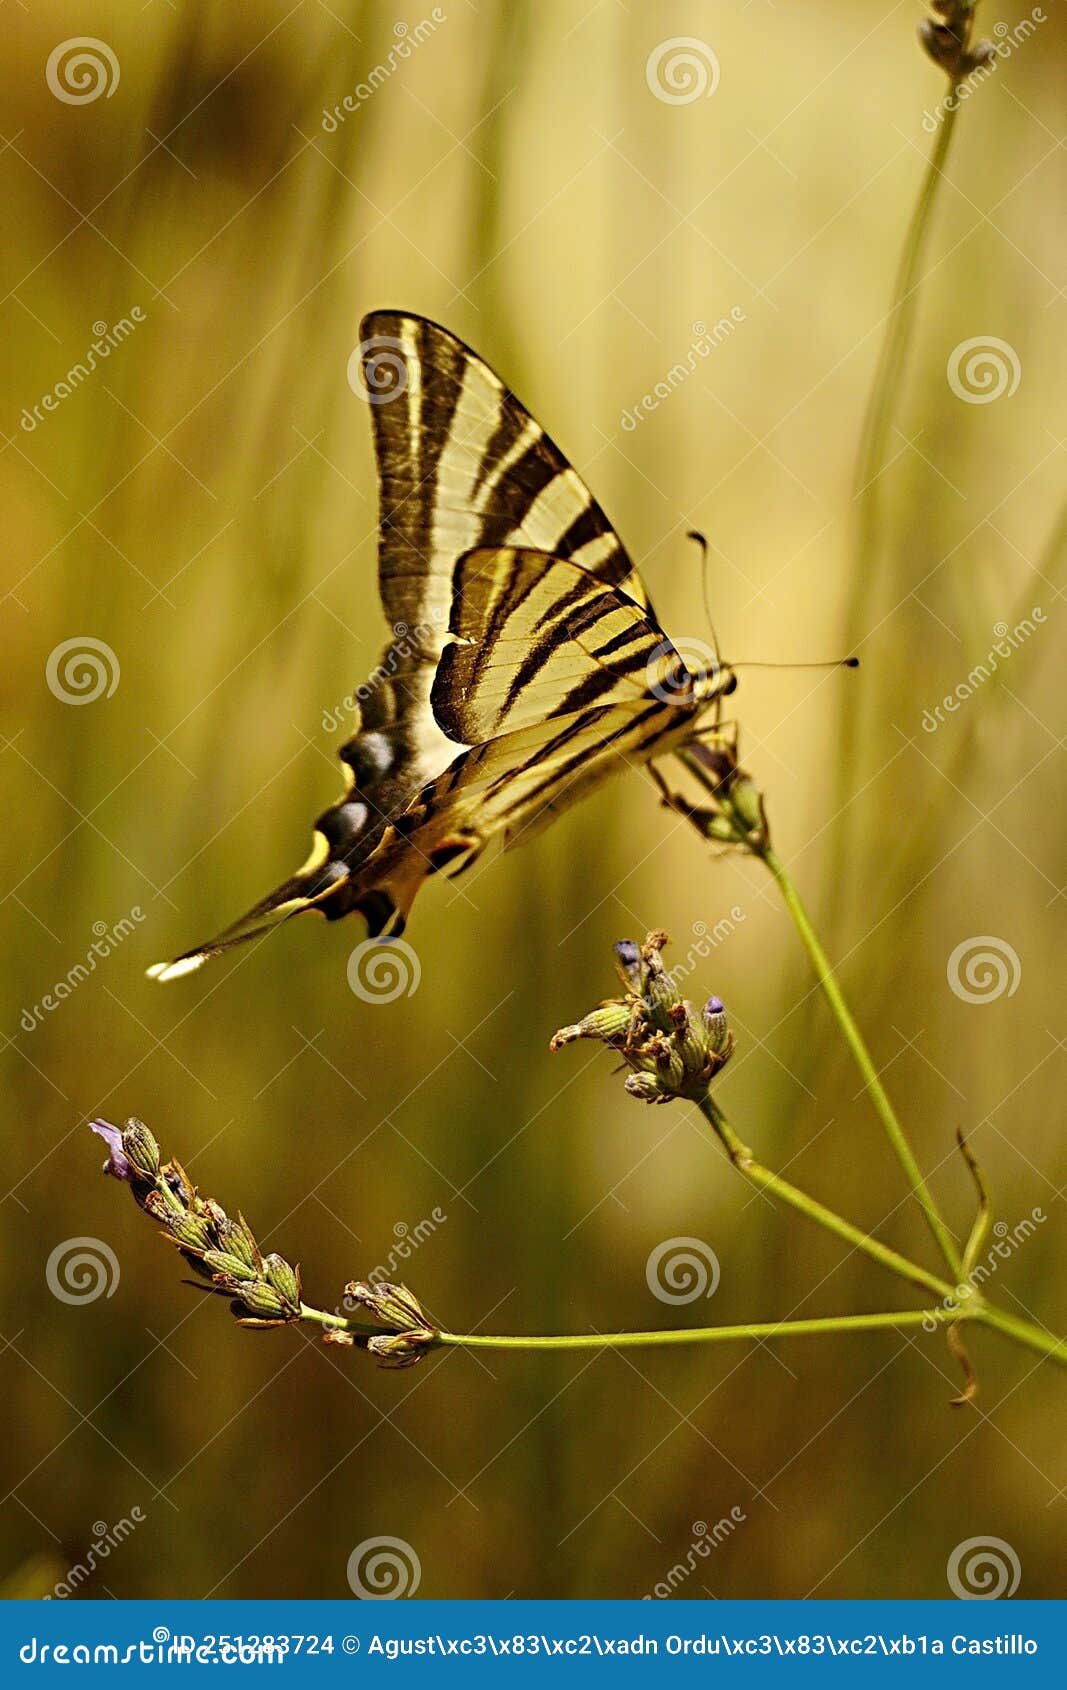 iphiclides feisthamelii or the milksucker, is a species of lepidoptera ditrisio of the family papilionidae